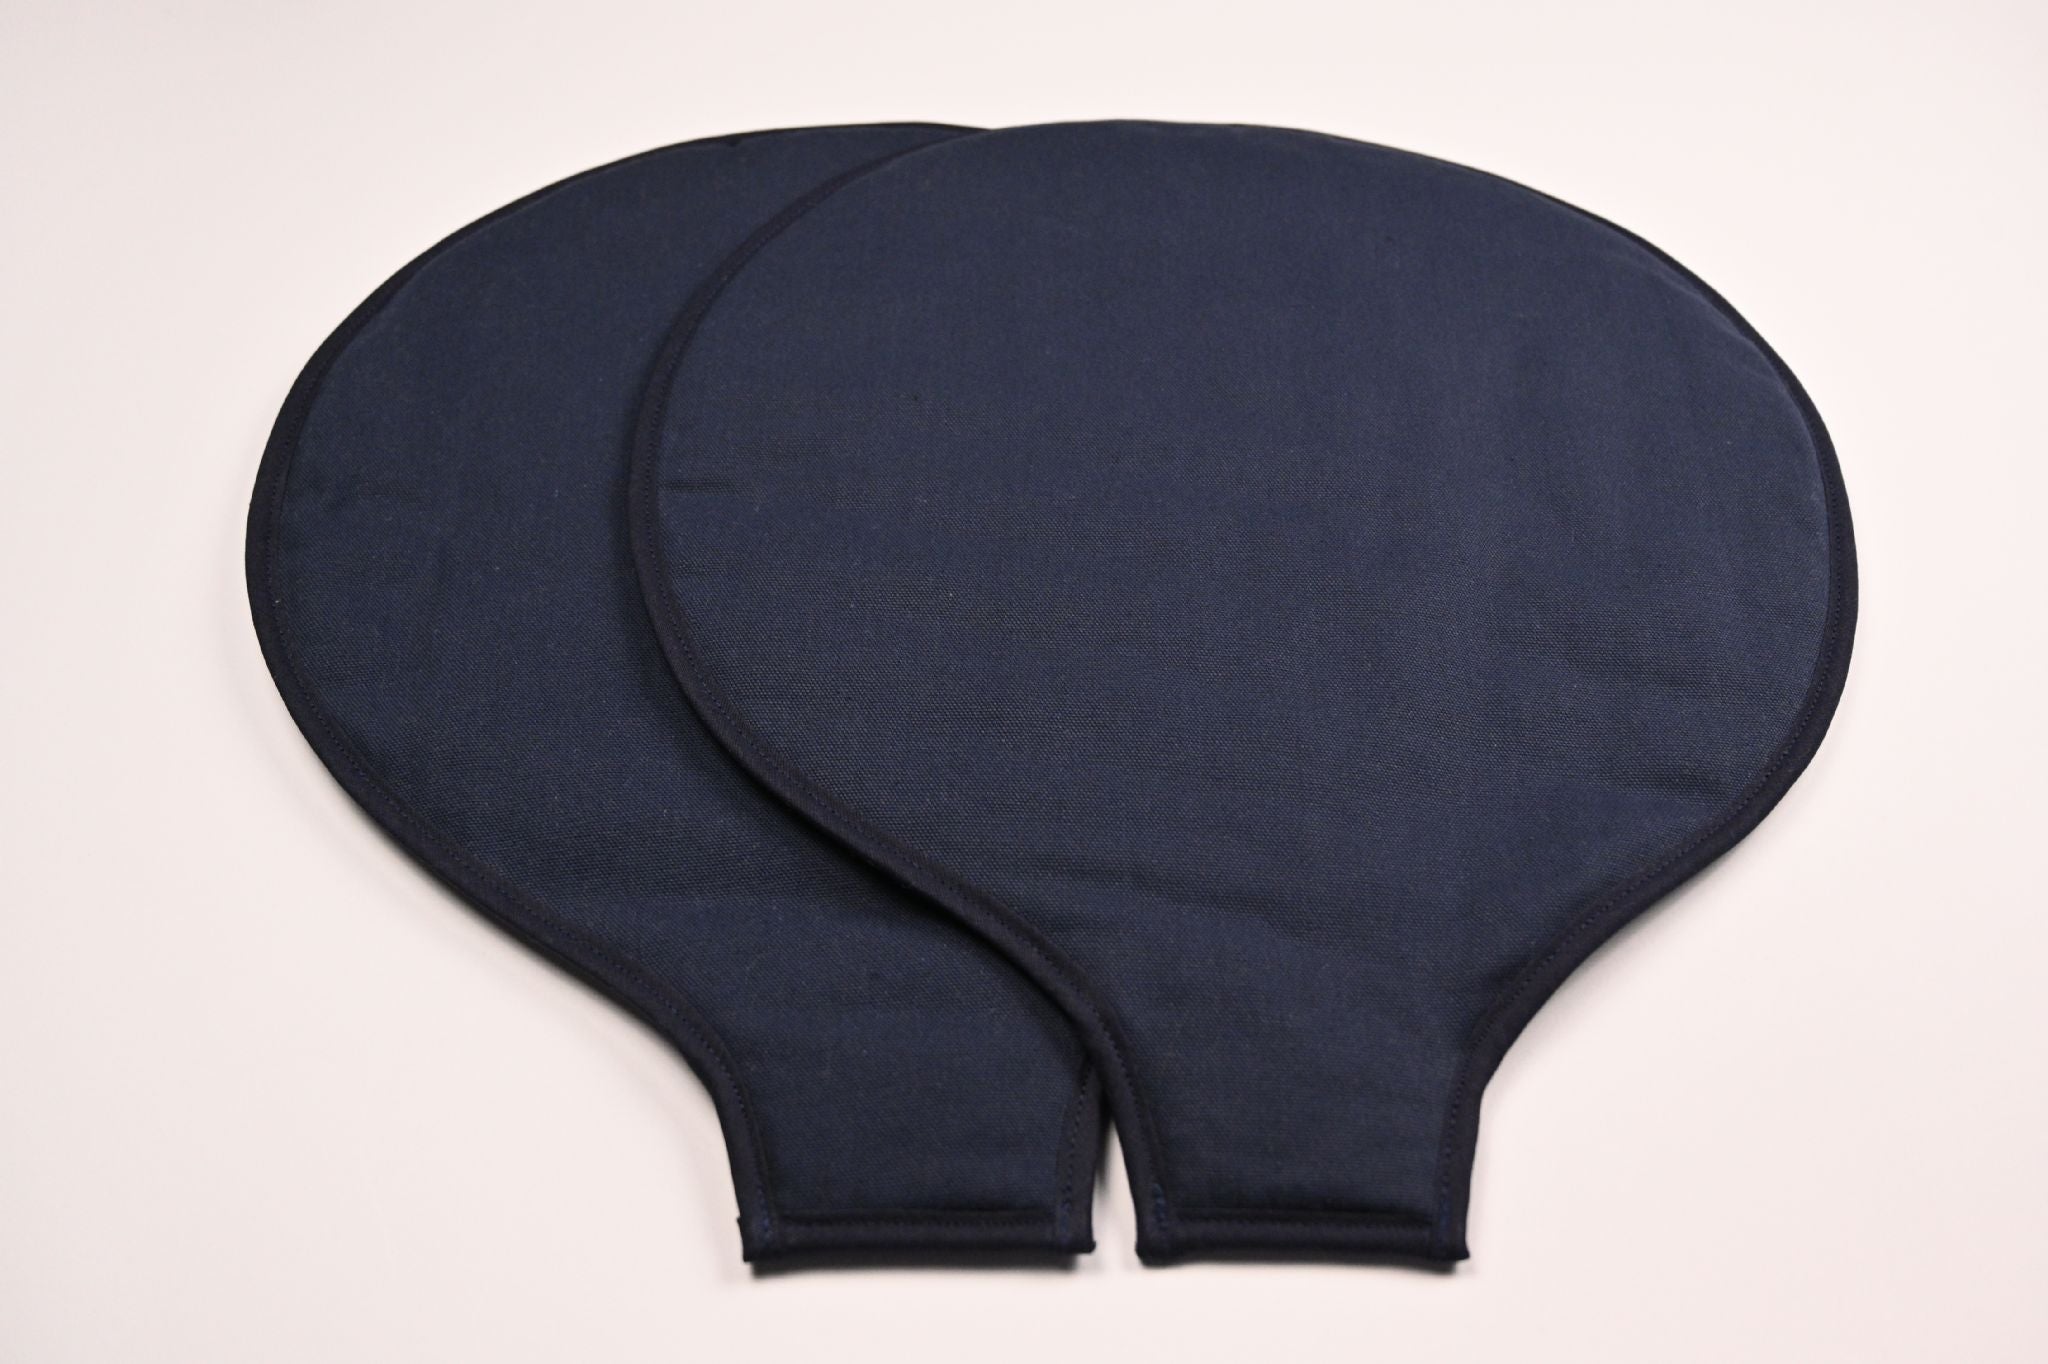 Magnetic Aga Tops, Range Covers, Chef Pads, Hob Covers, Navy Blue pair